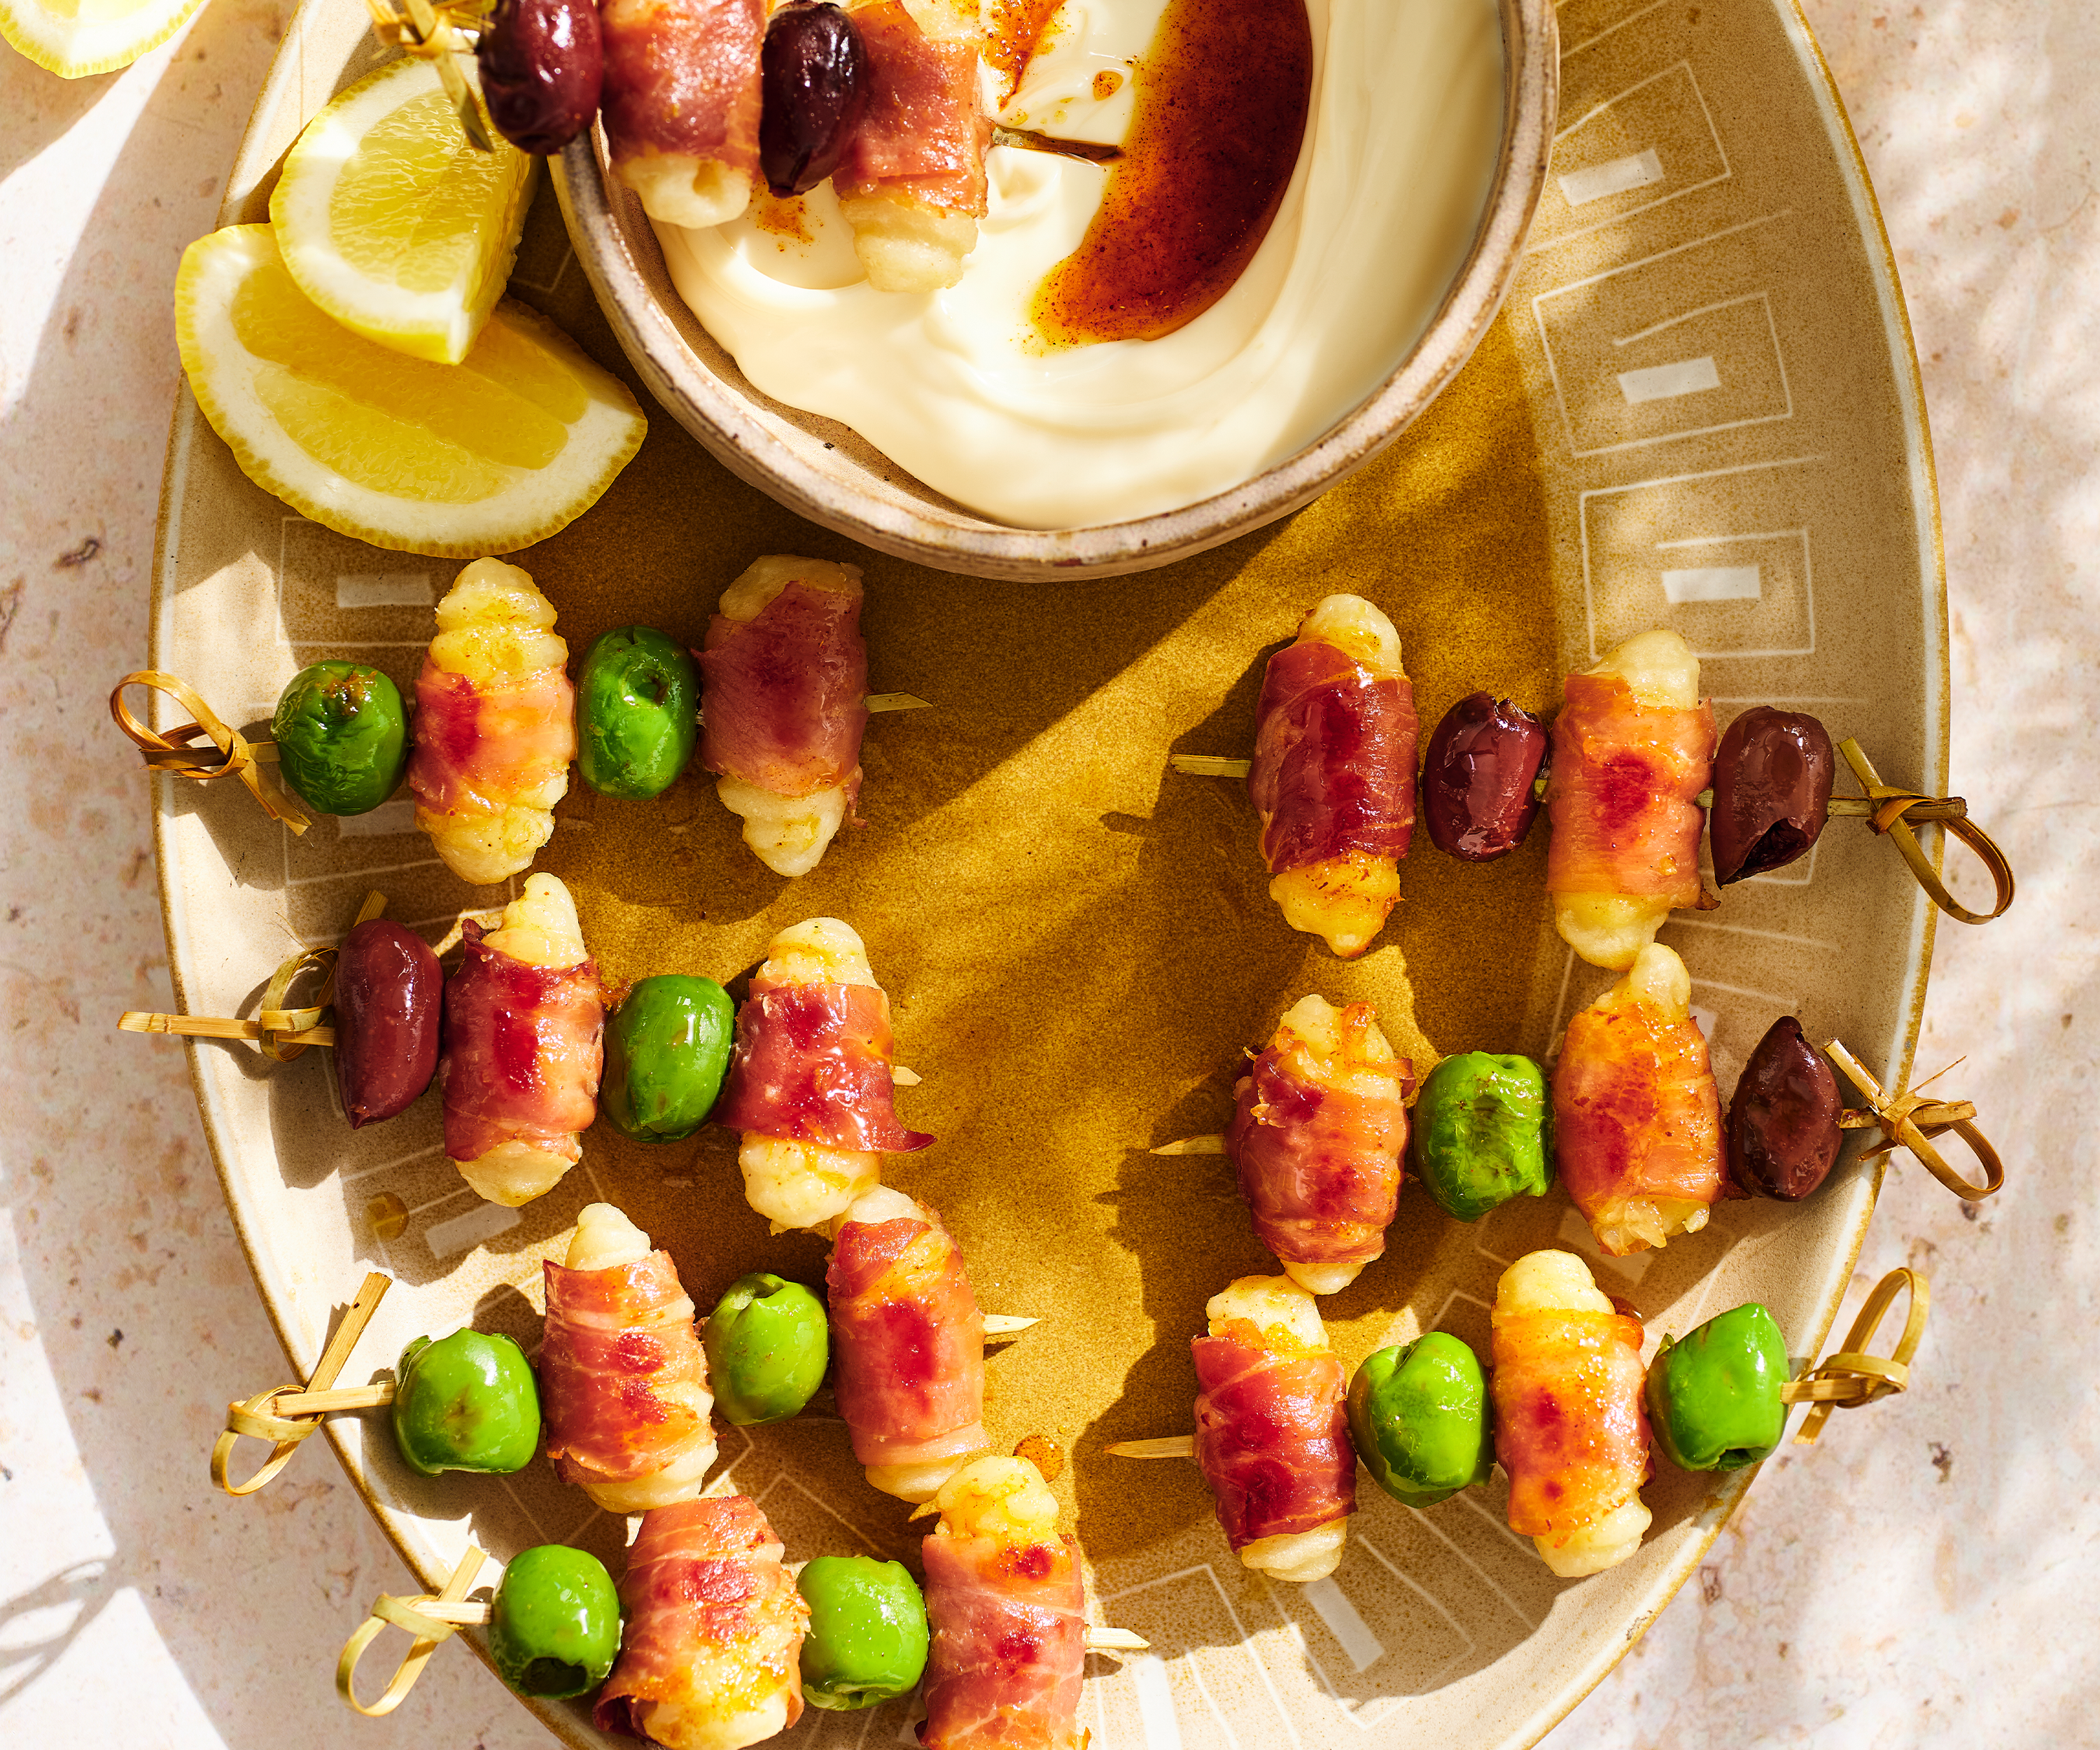 A plate of smoky gnocchi & prosciutto skewers